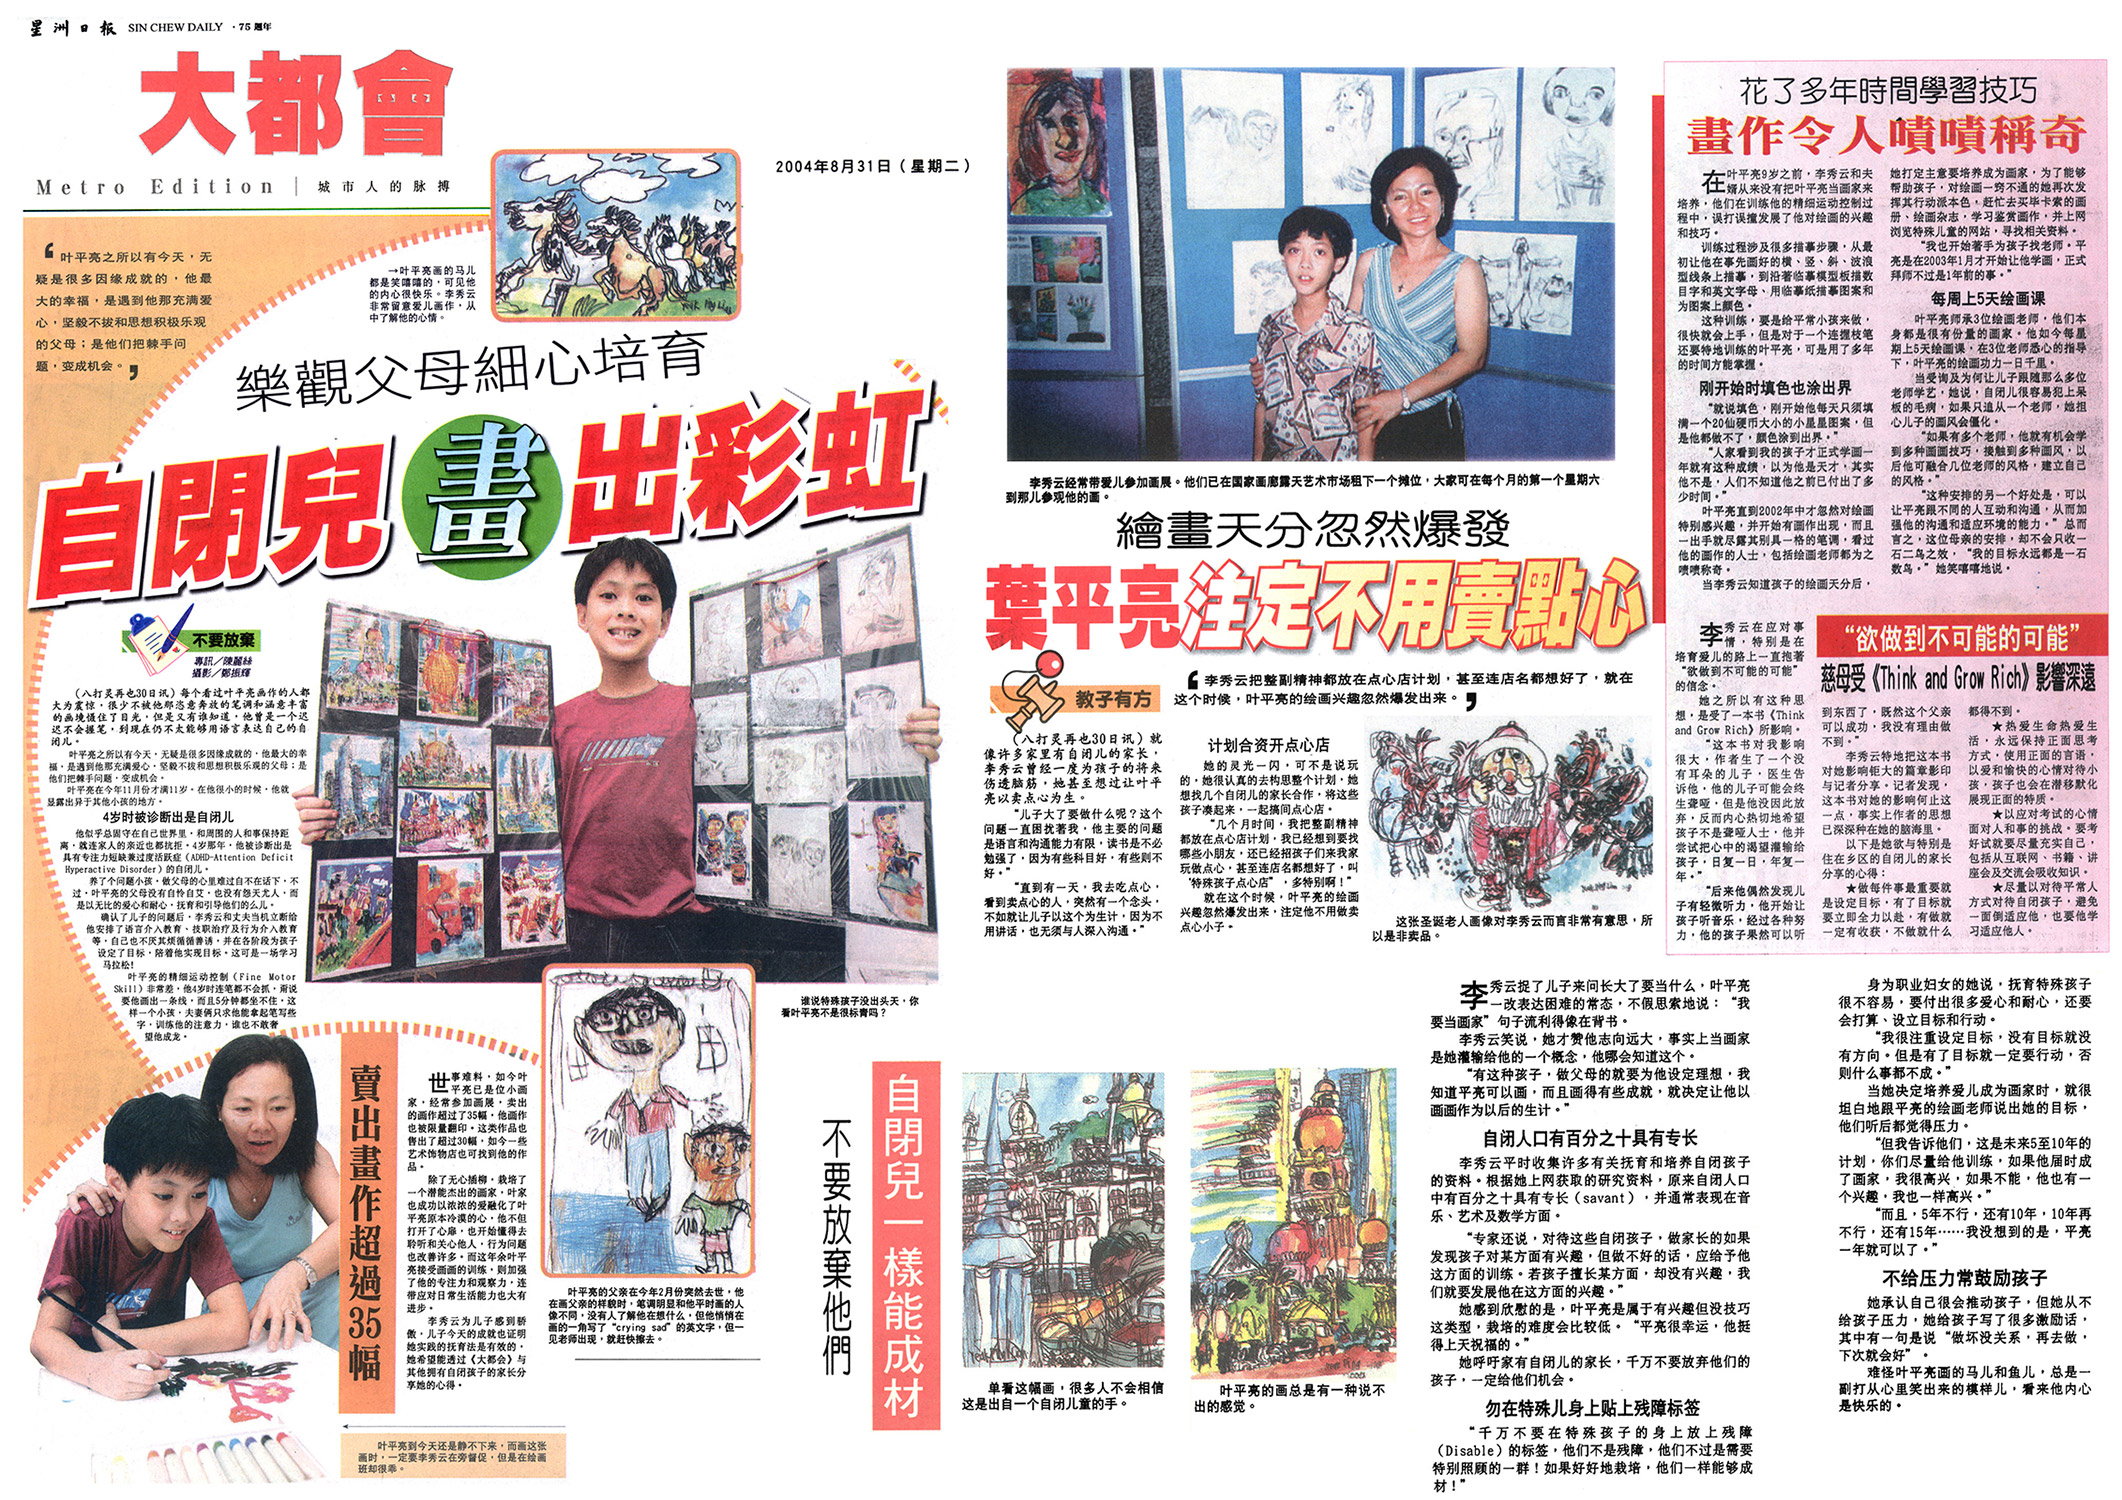 Sin chew daily news today